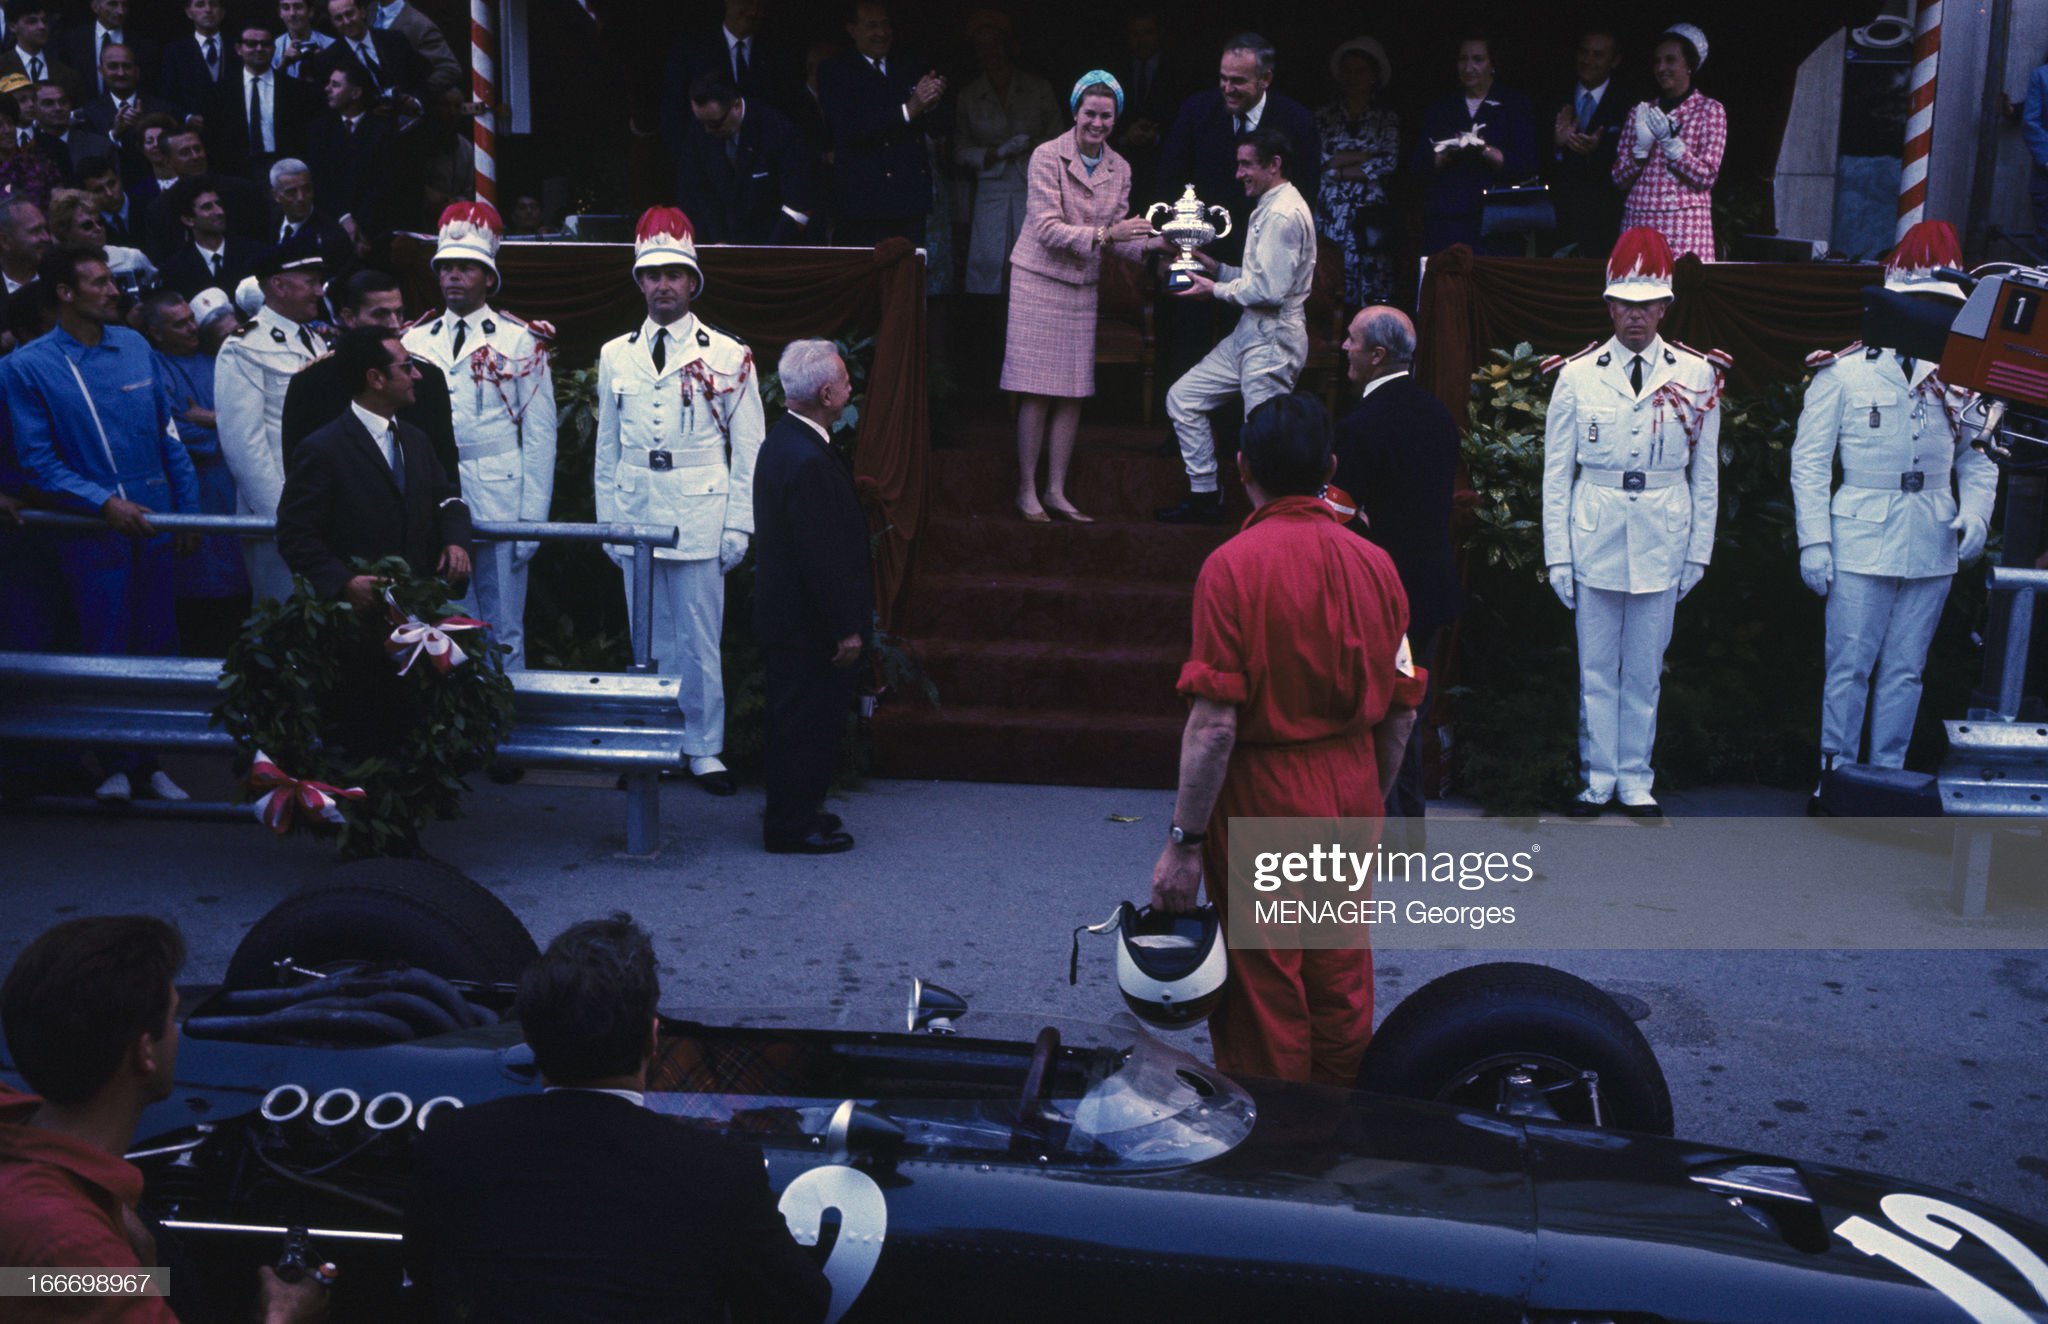 On May 22, 1966, after the Monaco Grand Prix, Jackie Stewart receives the cup from the hands of Grace Kelly, in front of Prince Rainier III. 